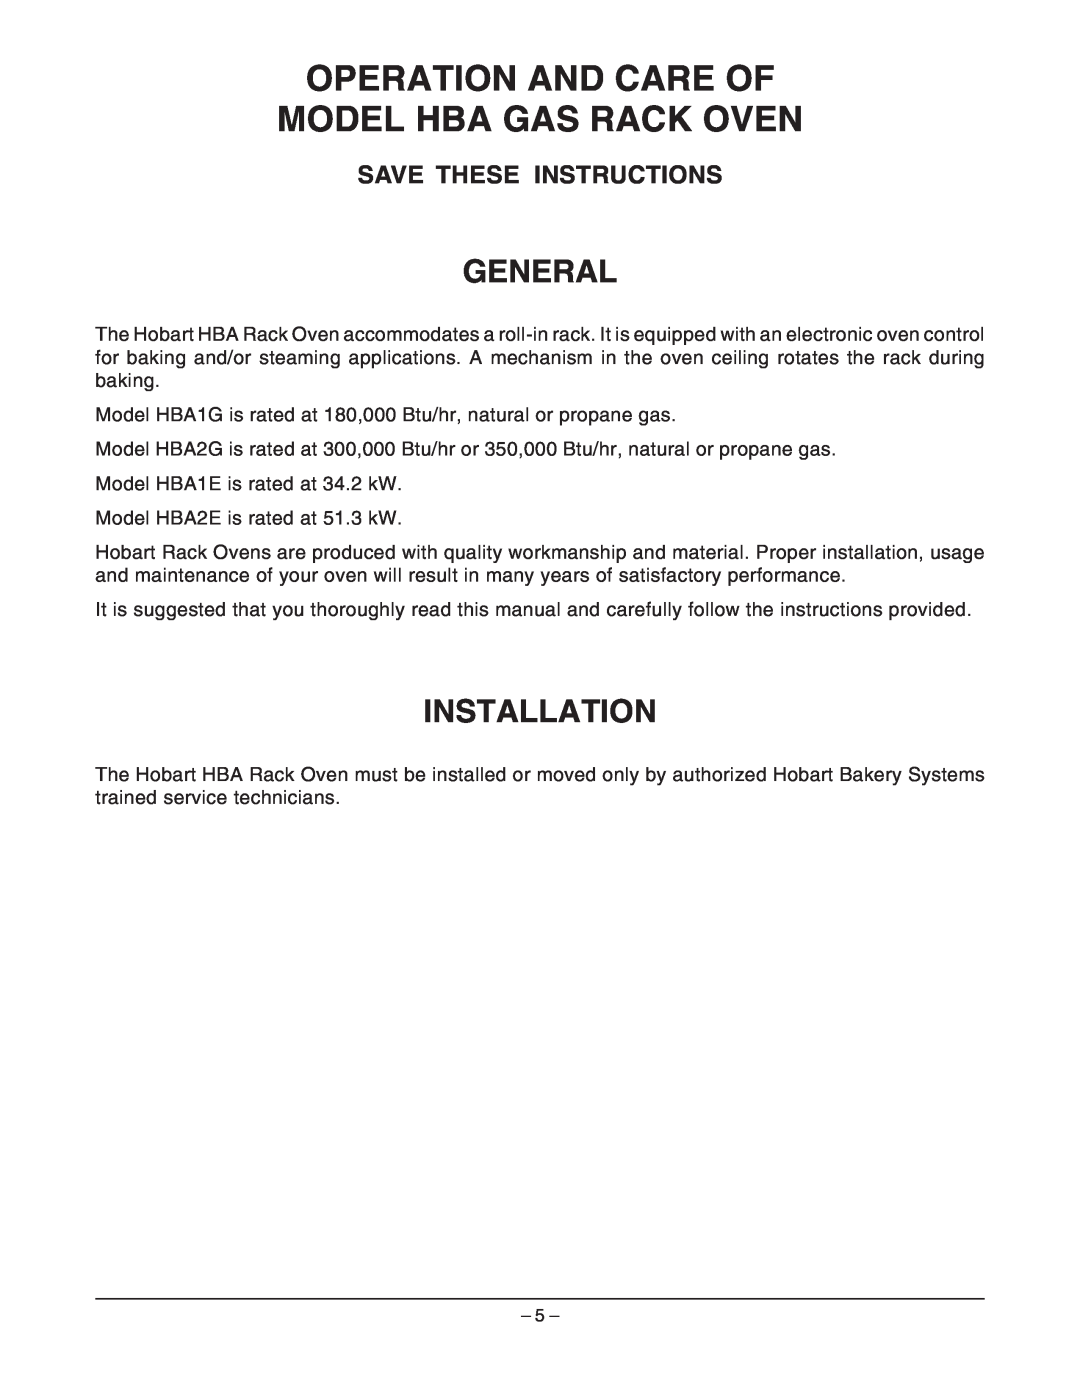 Hobart HBA2G, HBA2E manual General, Installation, Save These Instructions, Operation And Care Of Model Hba Gas Rack Oven 